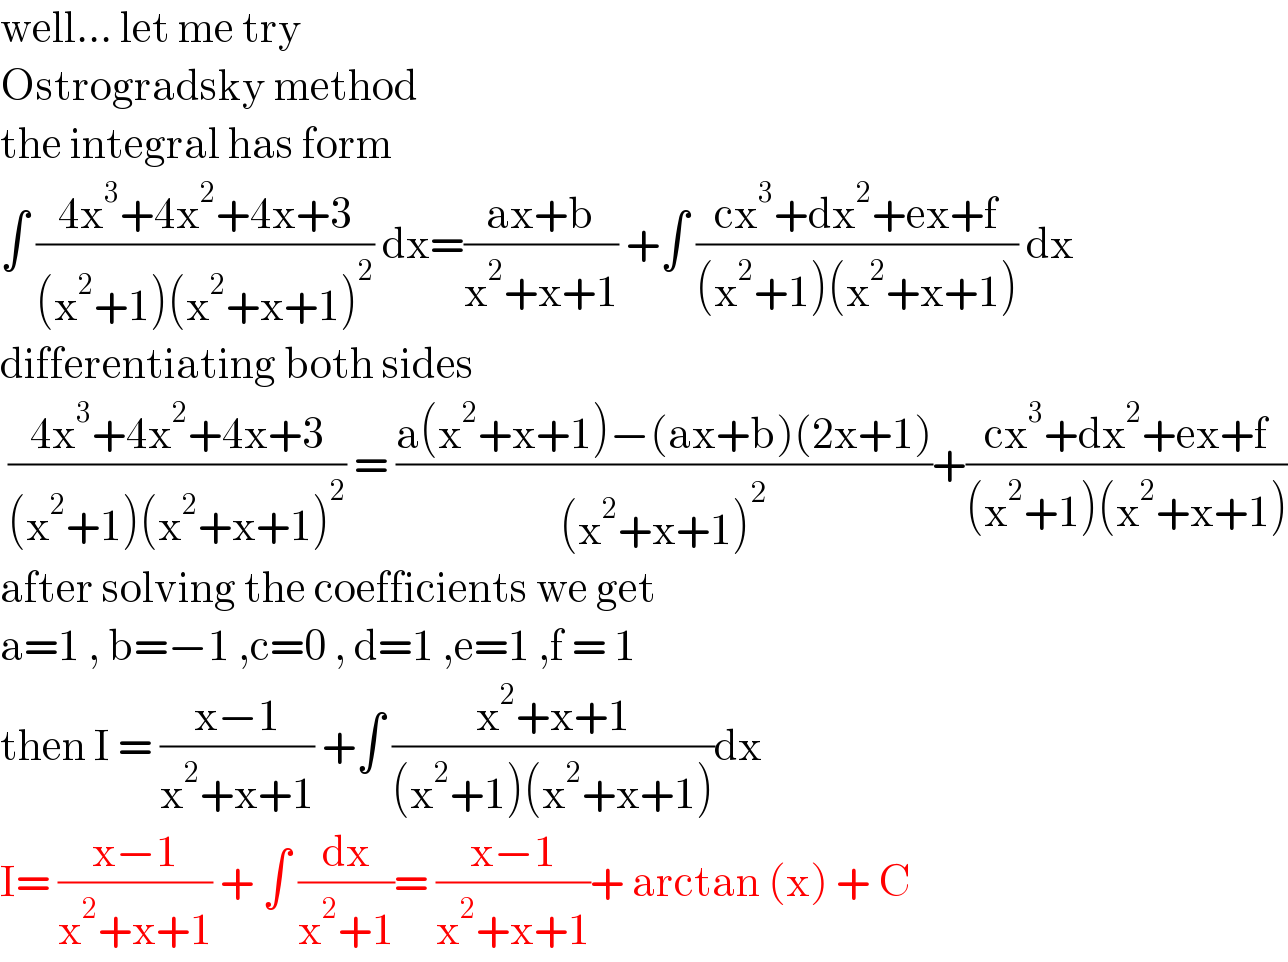 well... let me try  Ostrogradsky method  the integral has form   ∫ ((4x^3 +4x^2 +4x+3)/((x^2 +1)(x^2 +x+1)^2 )) dx=((ax+b)/(x^2 +x+1)) +∫ ((cx^3 +dx^2 +ex+f)/((x^2 +1)(x^2 +x+1))) dx  differentiating both sides   ((4x^3 +4x^2 +4x+3)/((x^2 +1)(x^2 +x+1)^2 )) = ((a(x^2 +x+1)−(ax+b)(2x+1))/((x^2 +x+1)^2 ))+((cx^3 +dx^2 +ex+f)/((x^2 +1)(x^2 +x+1)))  after solving the coefficients we get  a=1 , b=−1 ,c=0 , d=1 ,e=1 ,f = 1  then I = ((x−1)/(x^2 +x+1)) +∫ ((x^2 +x+1)/((x^2 +1)(x^2 +x+1)))dx  I= ((x−1)/(x^2 +x+1)) + ∫ (dx/(x^2 +1))= ((x−1)/(x^2 +x+1))+ arctan (x) + C  